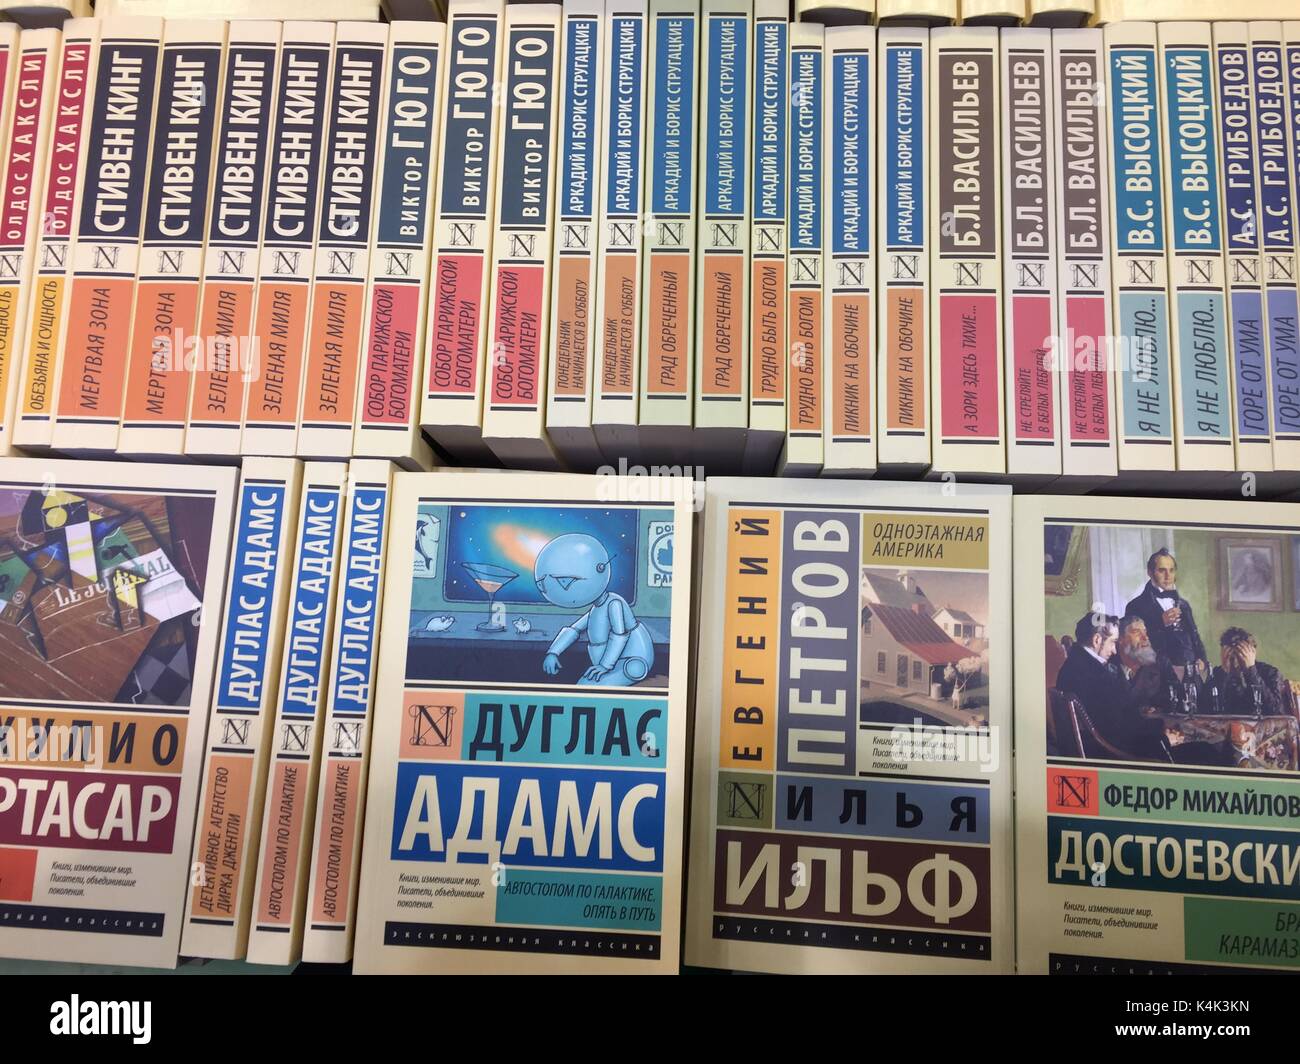 Russian and international classics are standing in a bookshelf of a stand at the international book fair in Moscow, Russia, 06 September 2017. Blue in the middle: Douglas Adams, The Hitchhiker's Guide to the Galaxy; to the right Ilja Ilf/Yevgeni Petrov, One-storied America and Fyodor Dostoyevsky, The Brothers Karamazov.  Circa 600 publishers from 39 countries participate in the largest book fair in Russia and the former Soviet Union, which is on until 10 September 2017. Photo: Friedemann Kohler/dpa Stock Photo